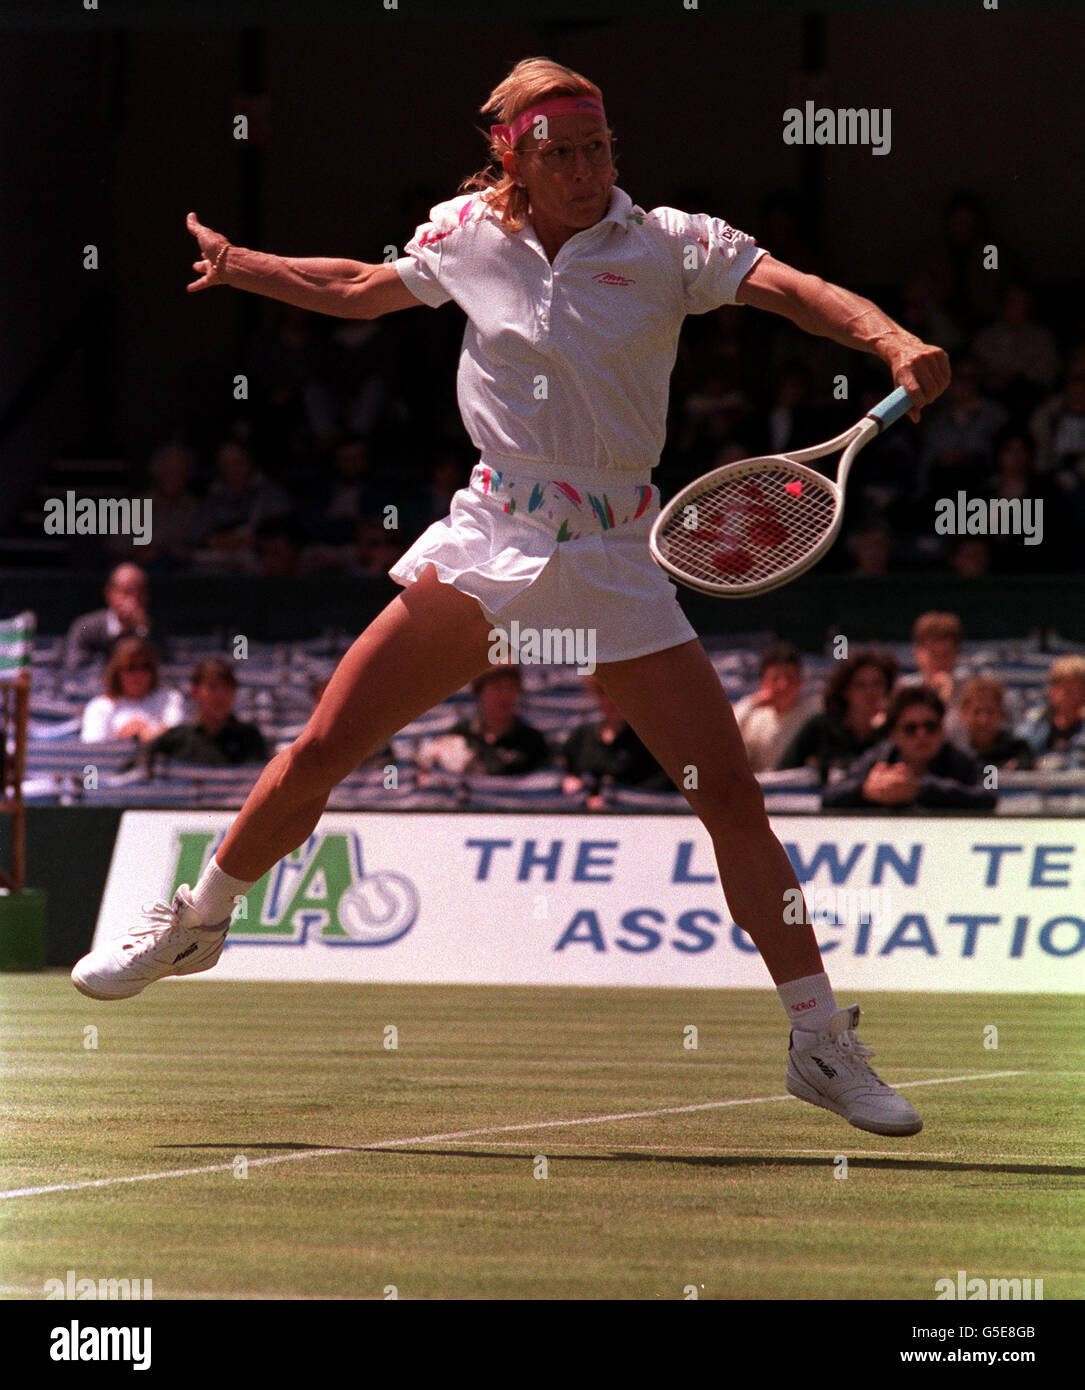 MARTINA NAVRATILOVA, the number 1 seed, in action at Eastbourne, East Sussex. Stock Photo